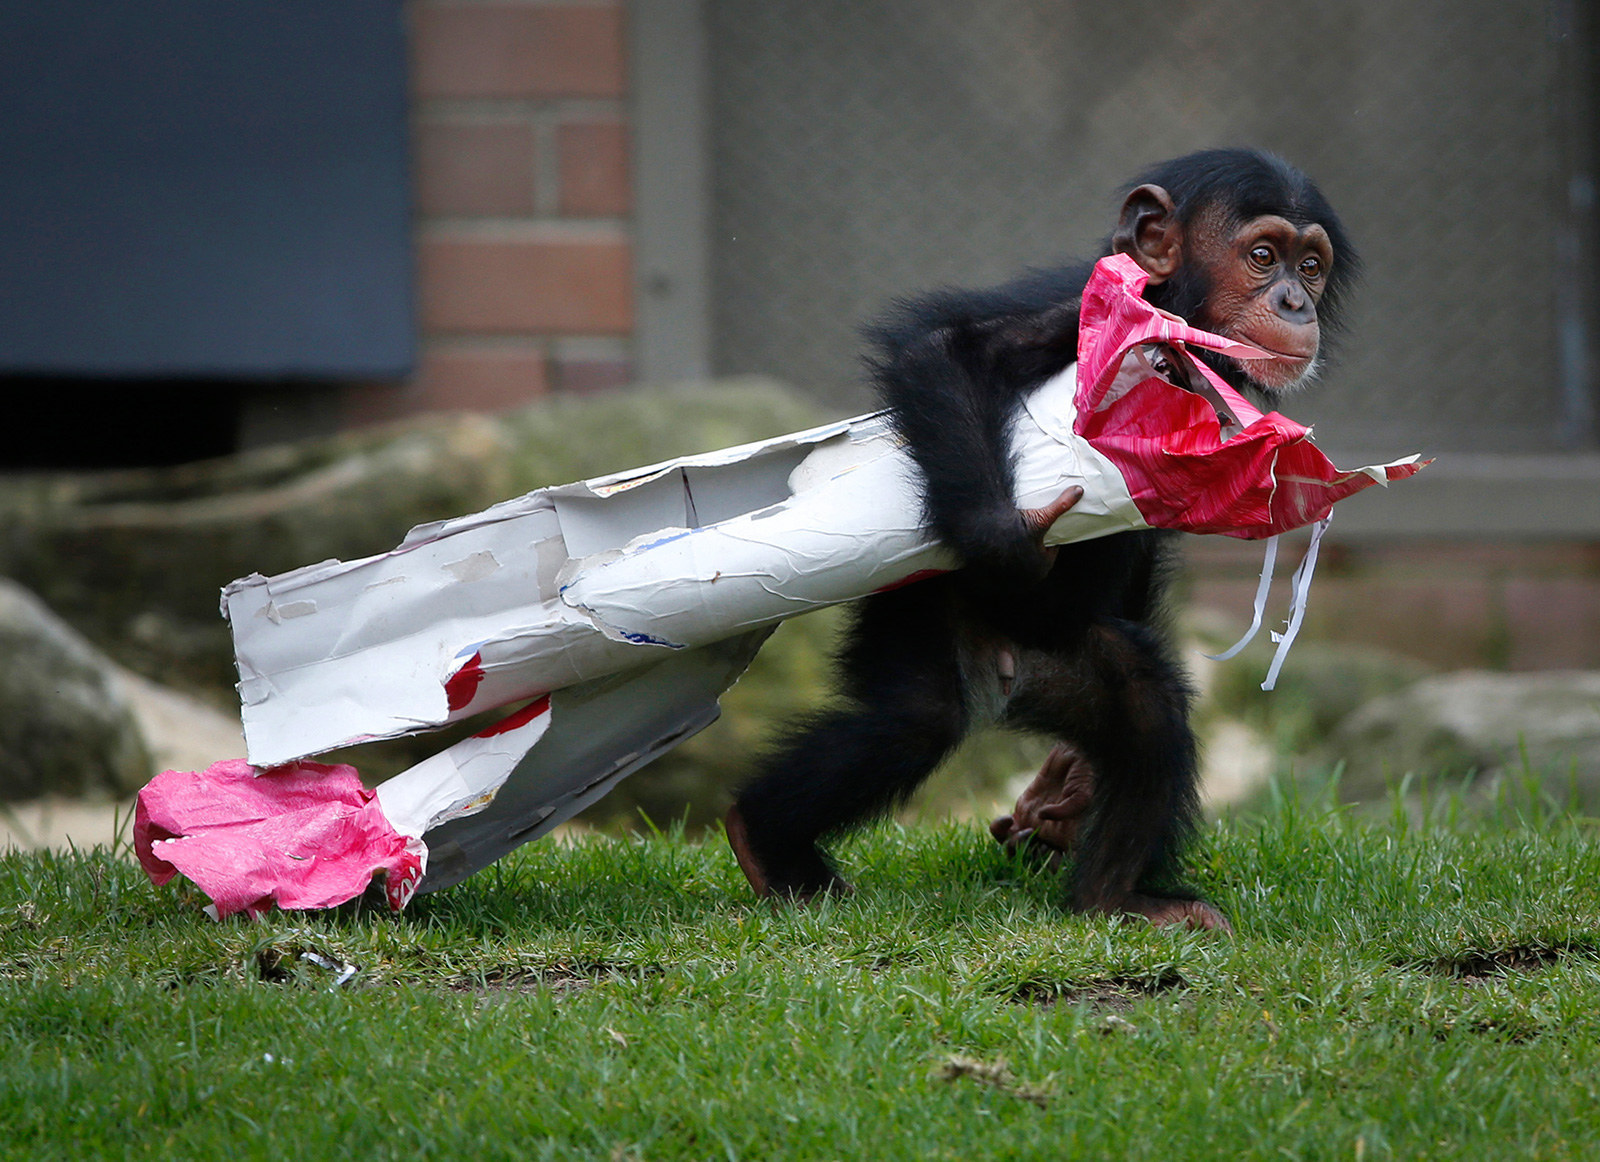 A 13-month old chimp named Fumo carries a Christmas present of food treats in wrapping paper under his arm during a Christmas themed feeding time at Sydney Zoo.